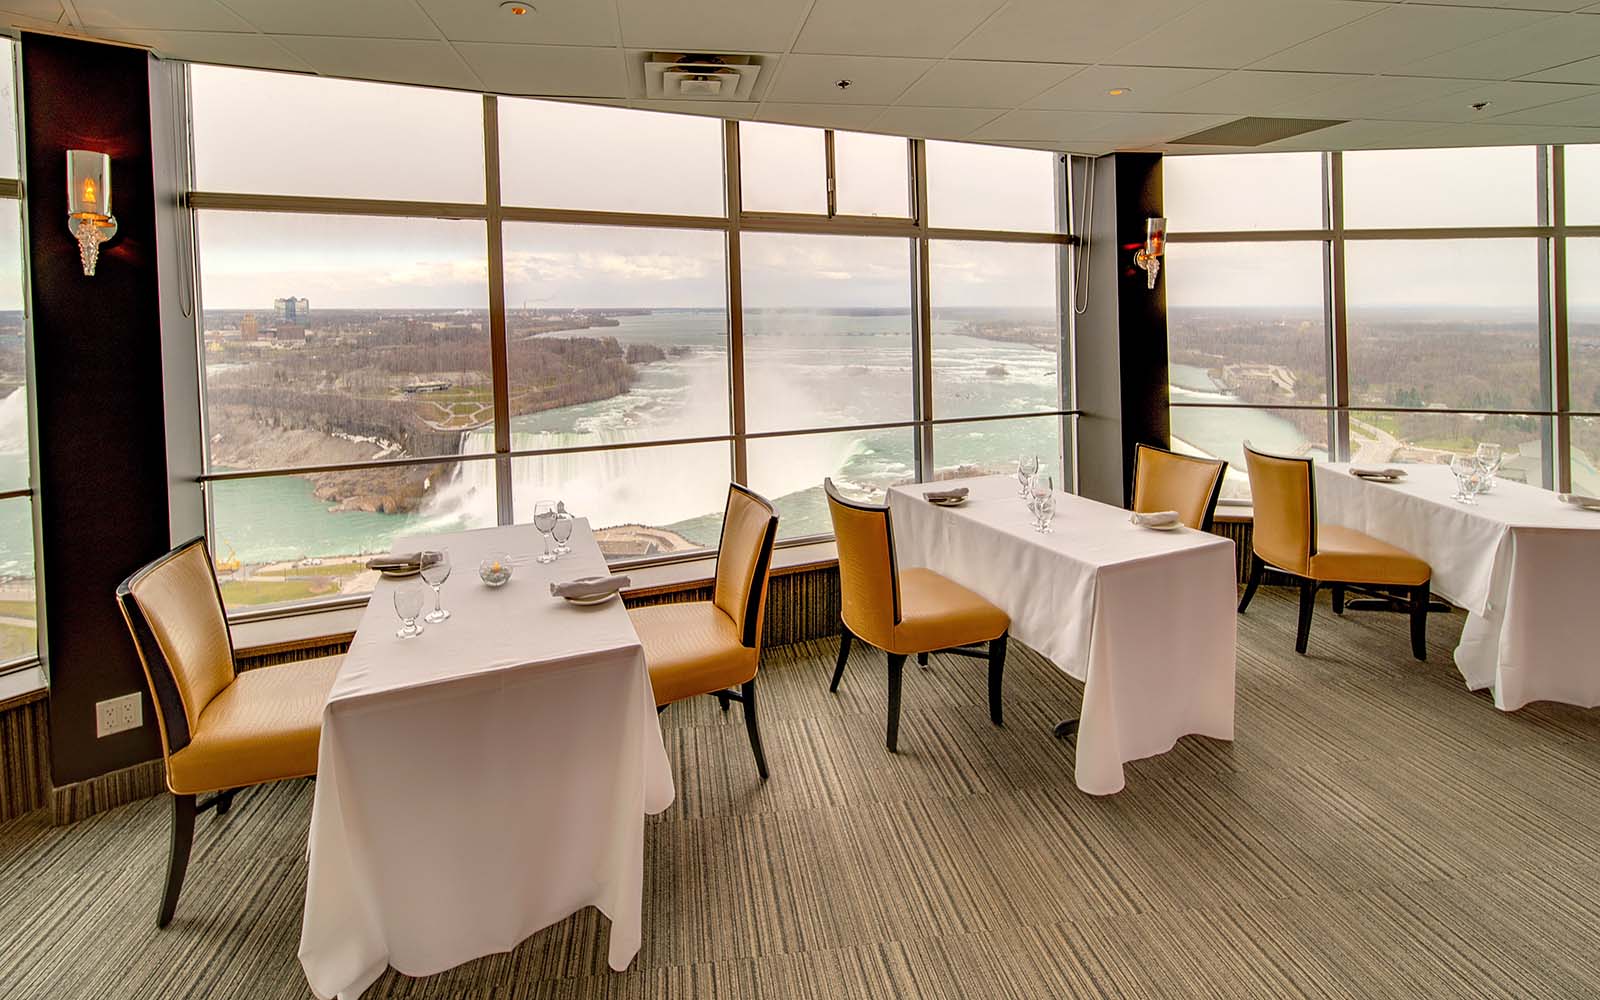 Restaurant with large windows overlooking Niagara Falls; tables are set with white tablecloths, brown chairs, and place settings.